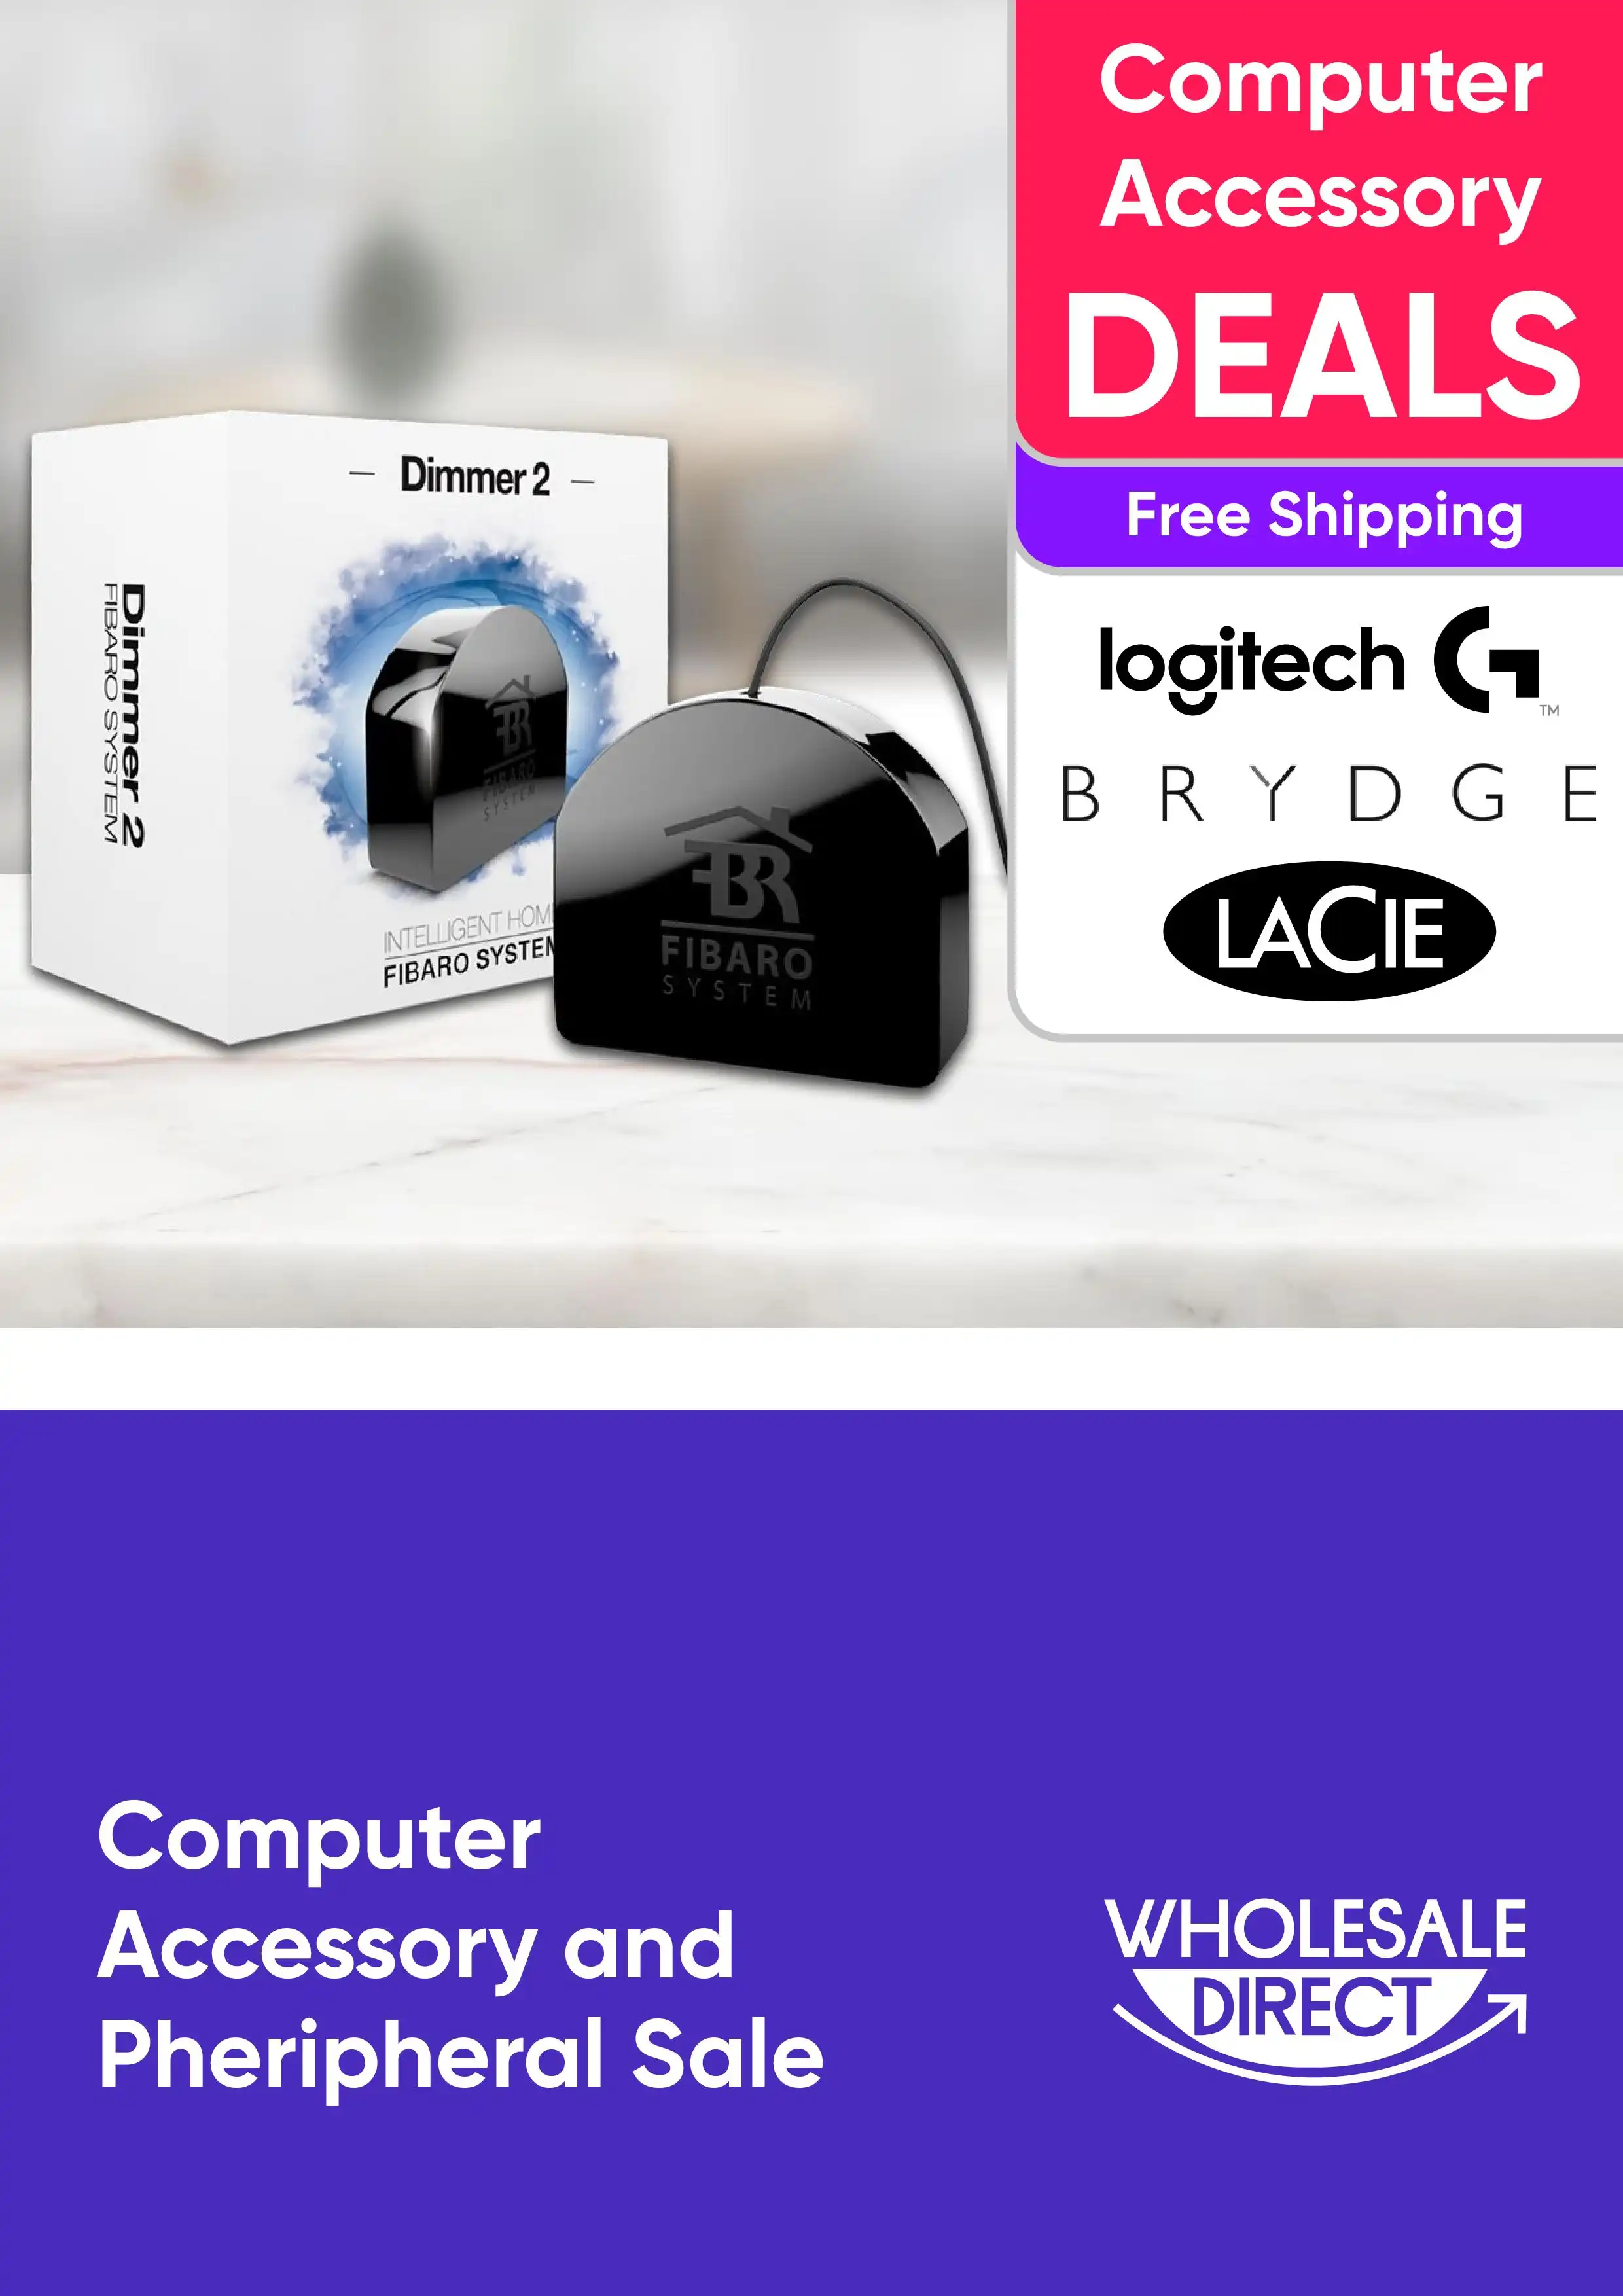 Computer Accessory and Pheripheral Sale - Logitech, Brydge, LaCie